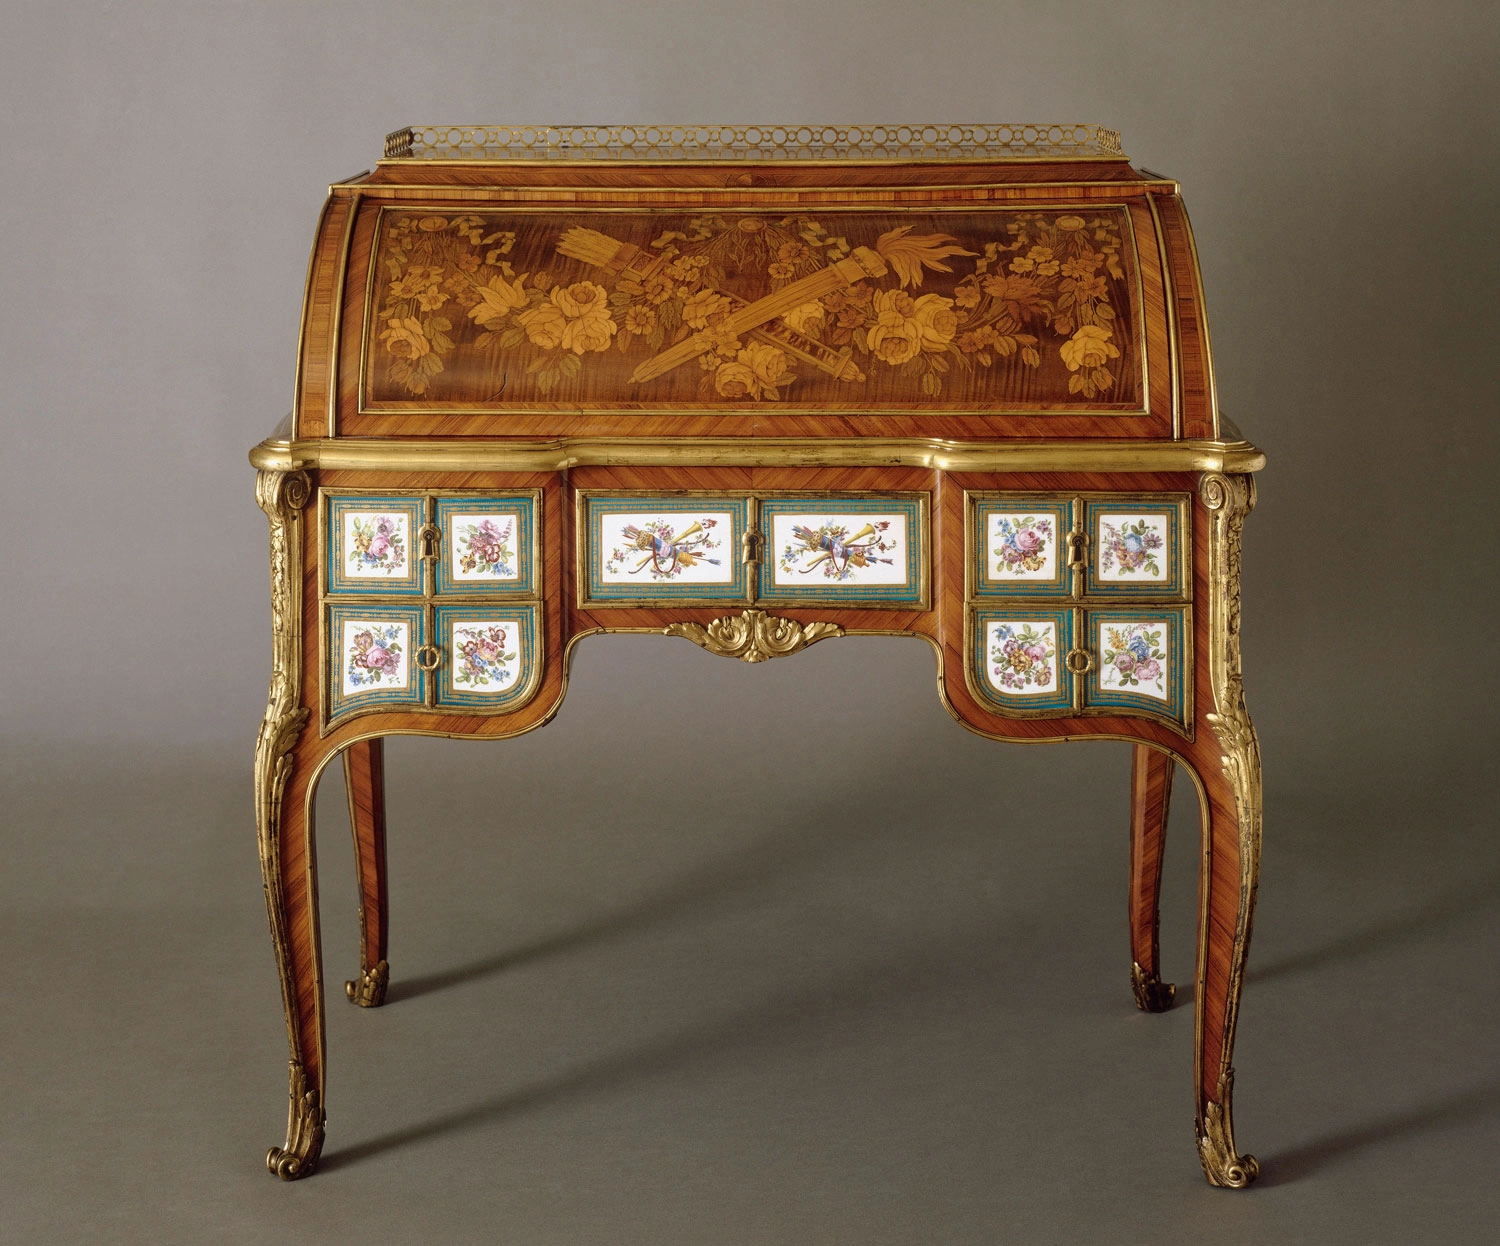 The Art of Living at the French Court - Furniture and art objects